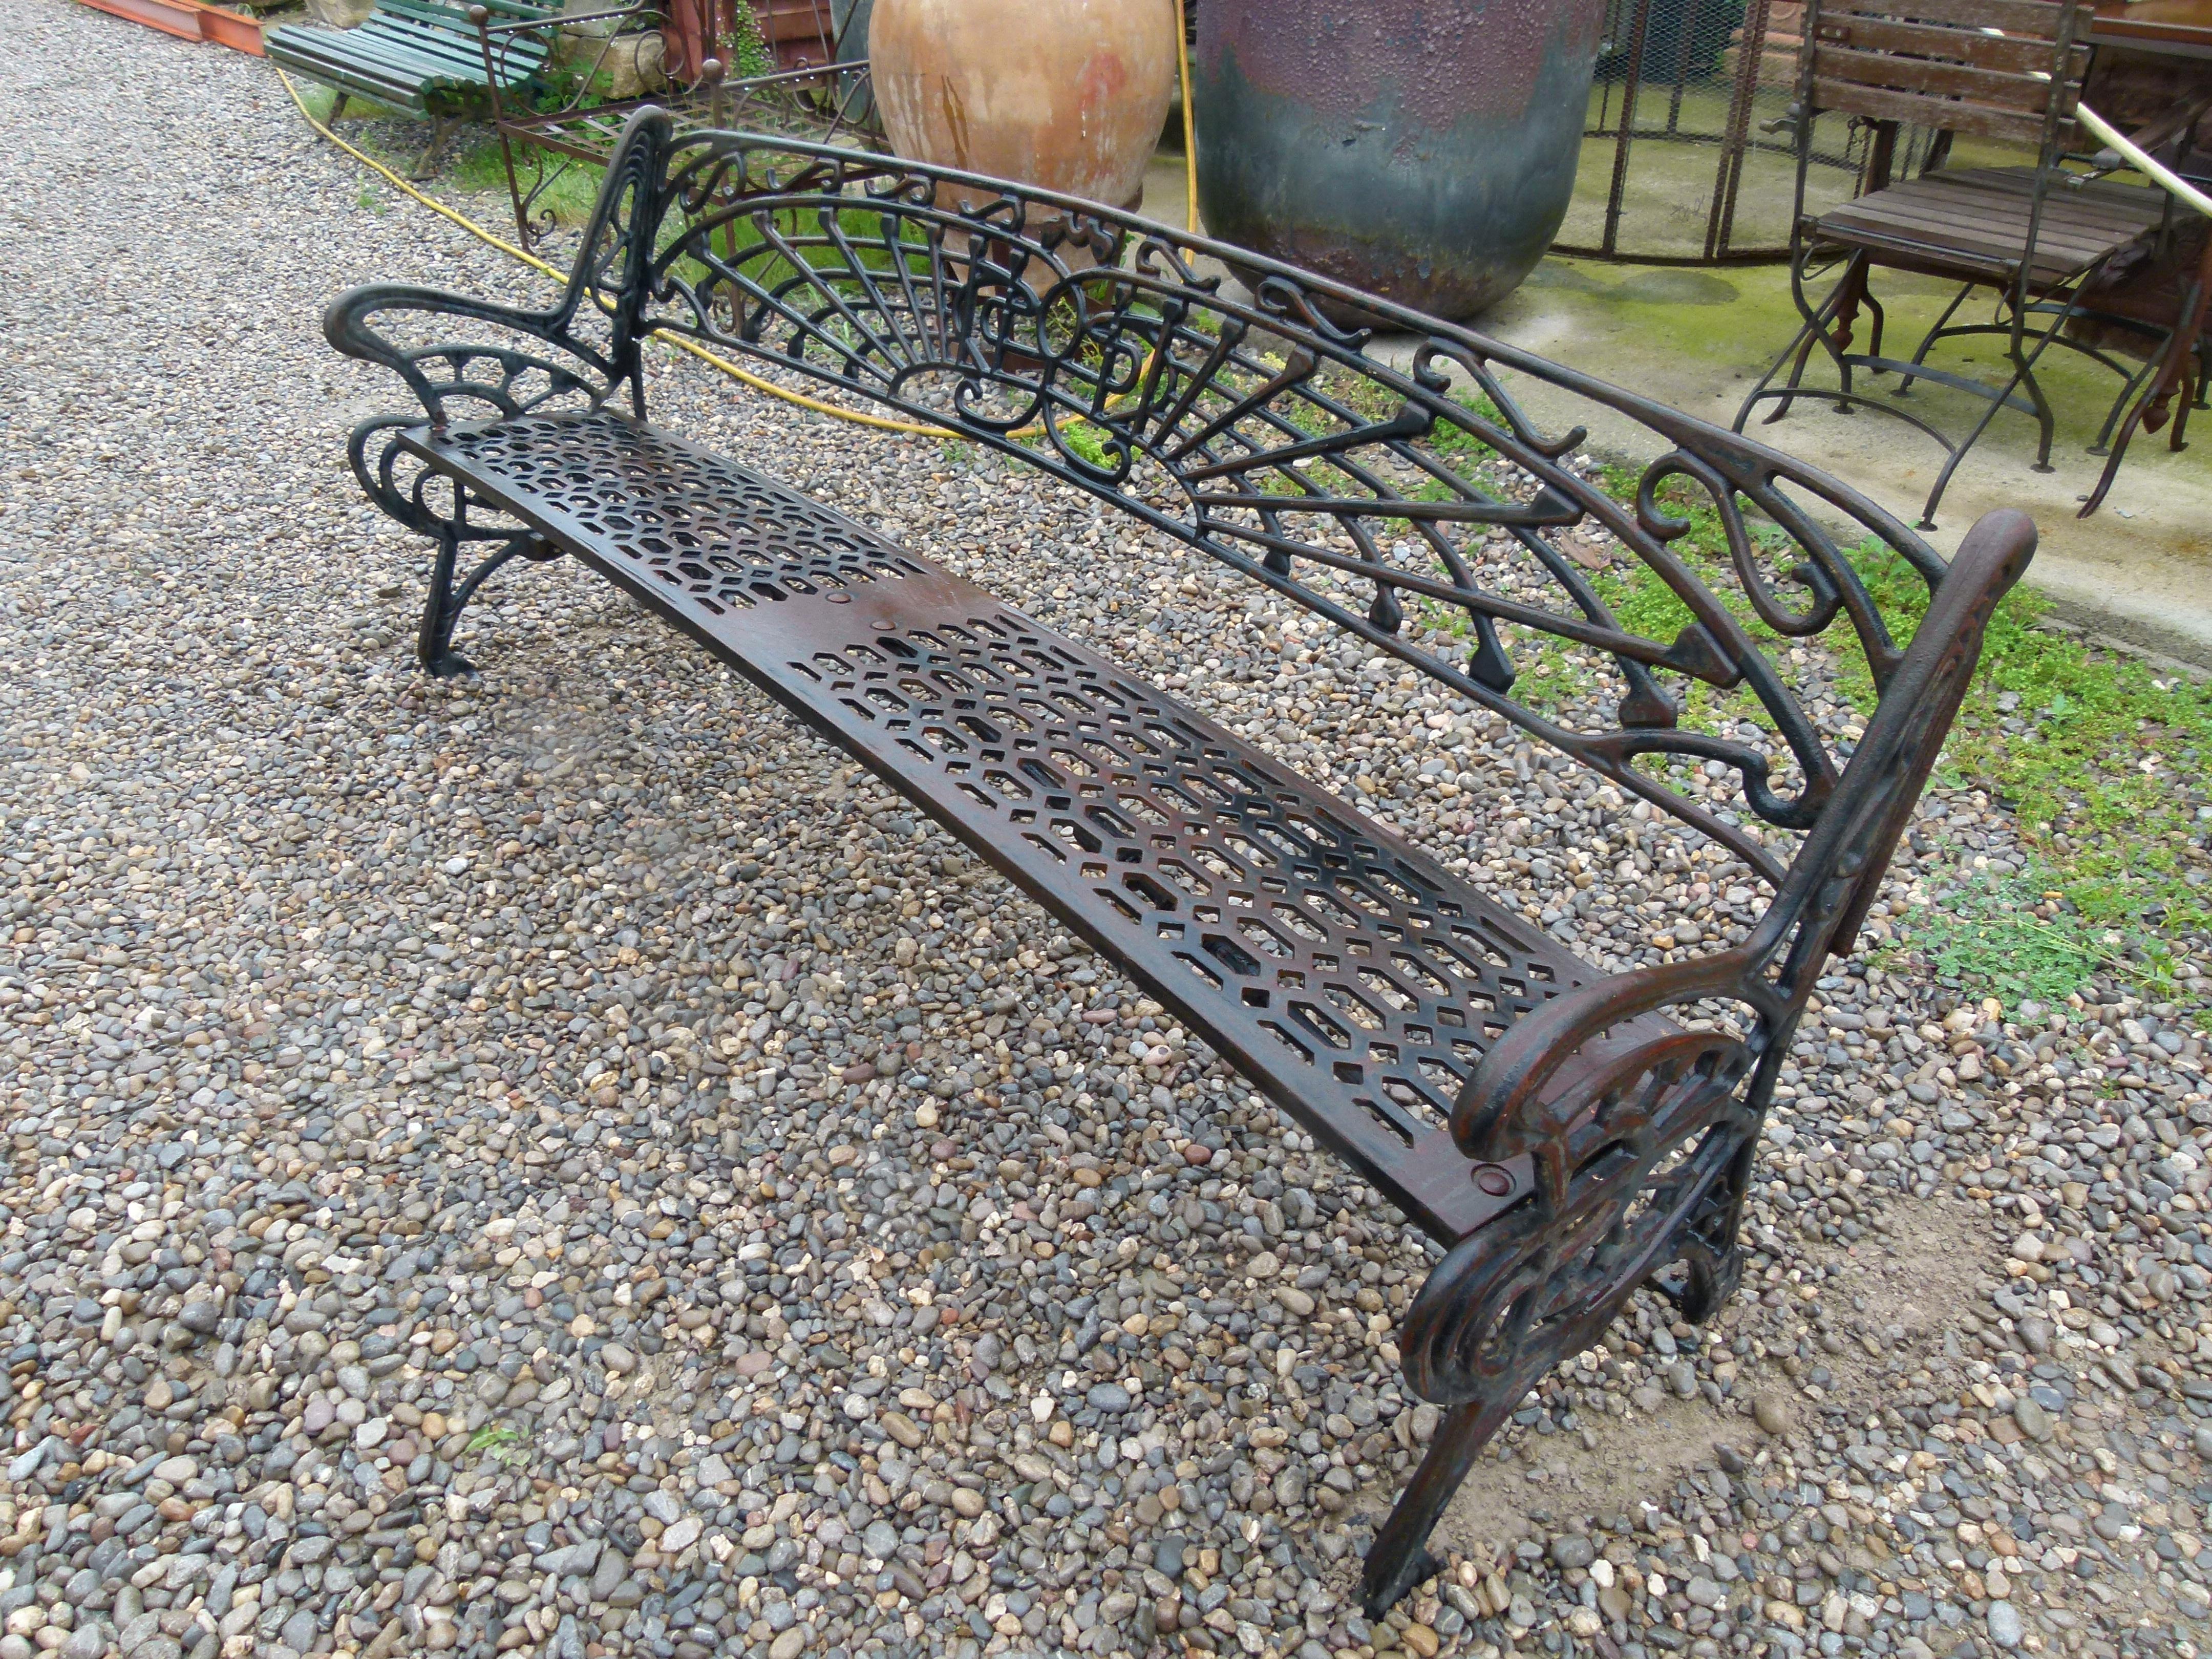 20th century Modernist style garden bench, molten iron, Spain.
Perfect for sitting almost 4 people 

